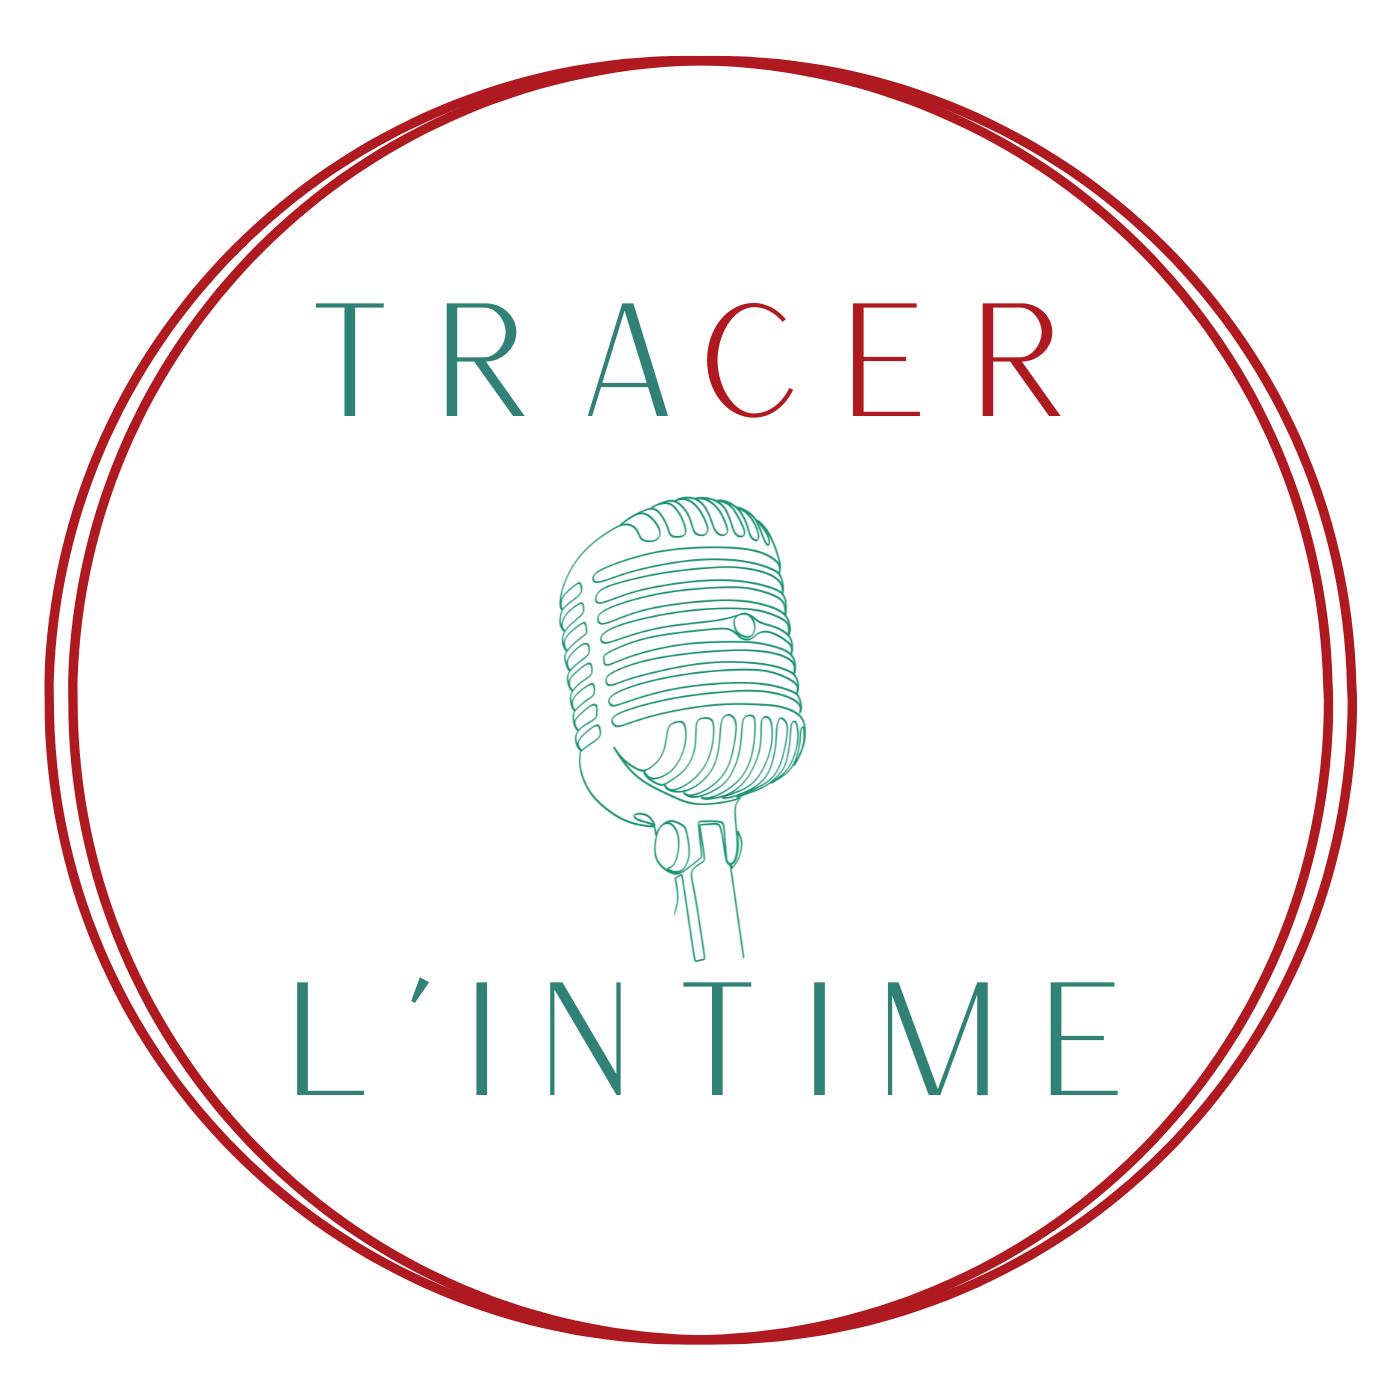 Tracer lintime 1400 x 1400 px 3